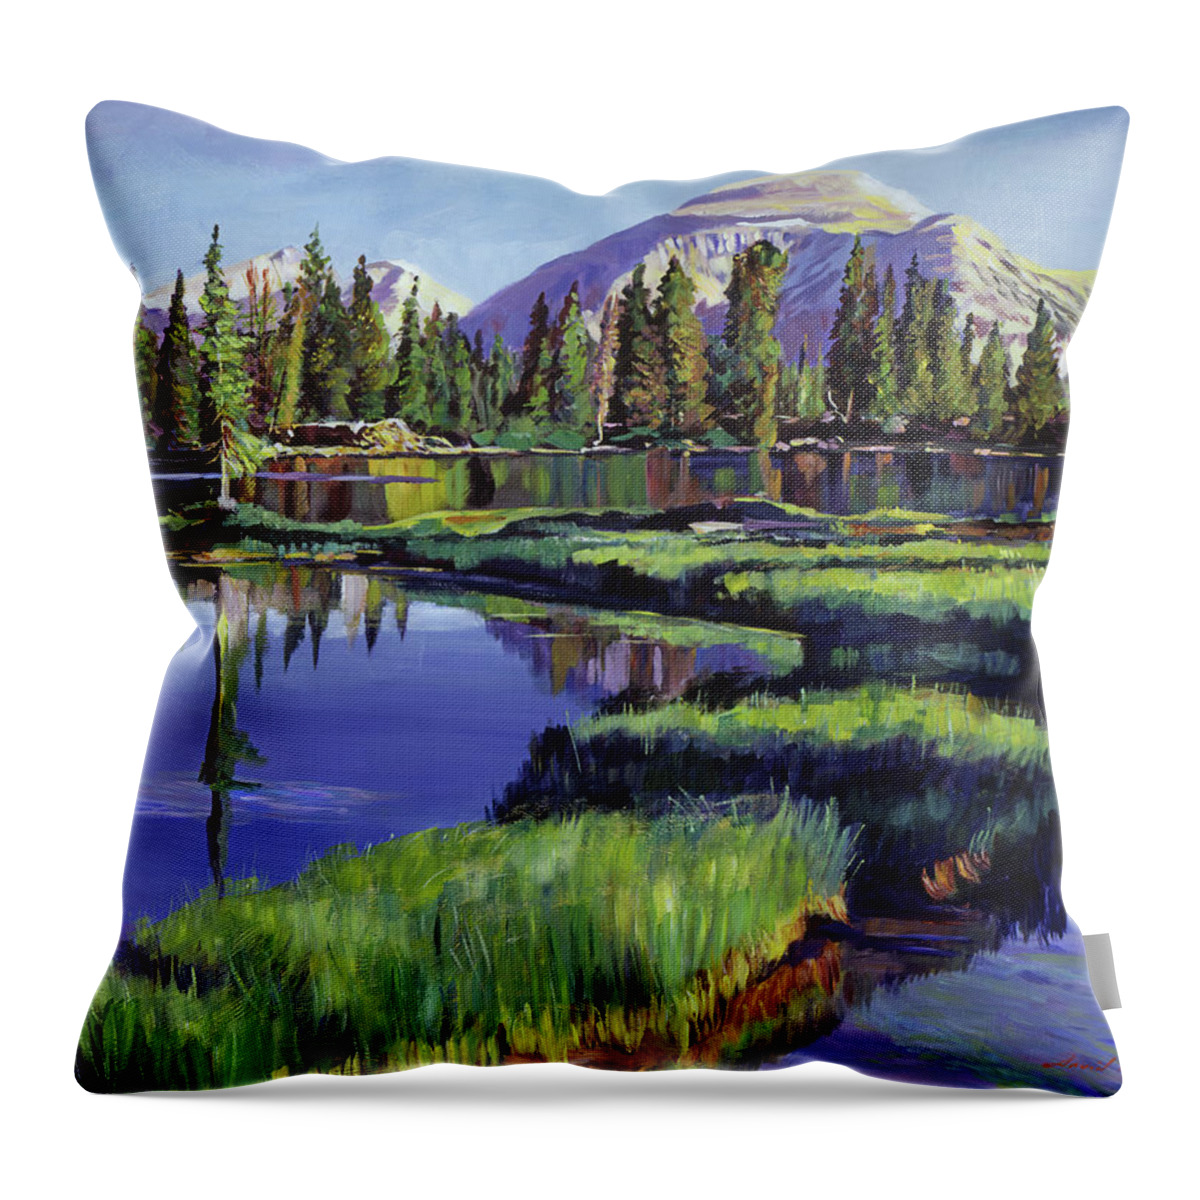 Landscape Throw Pillow featuring the painting Fishermans Lake Reflections by David Lloyd Glover